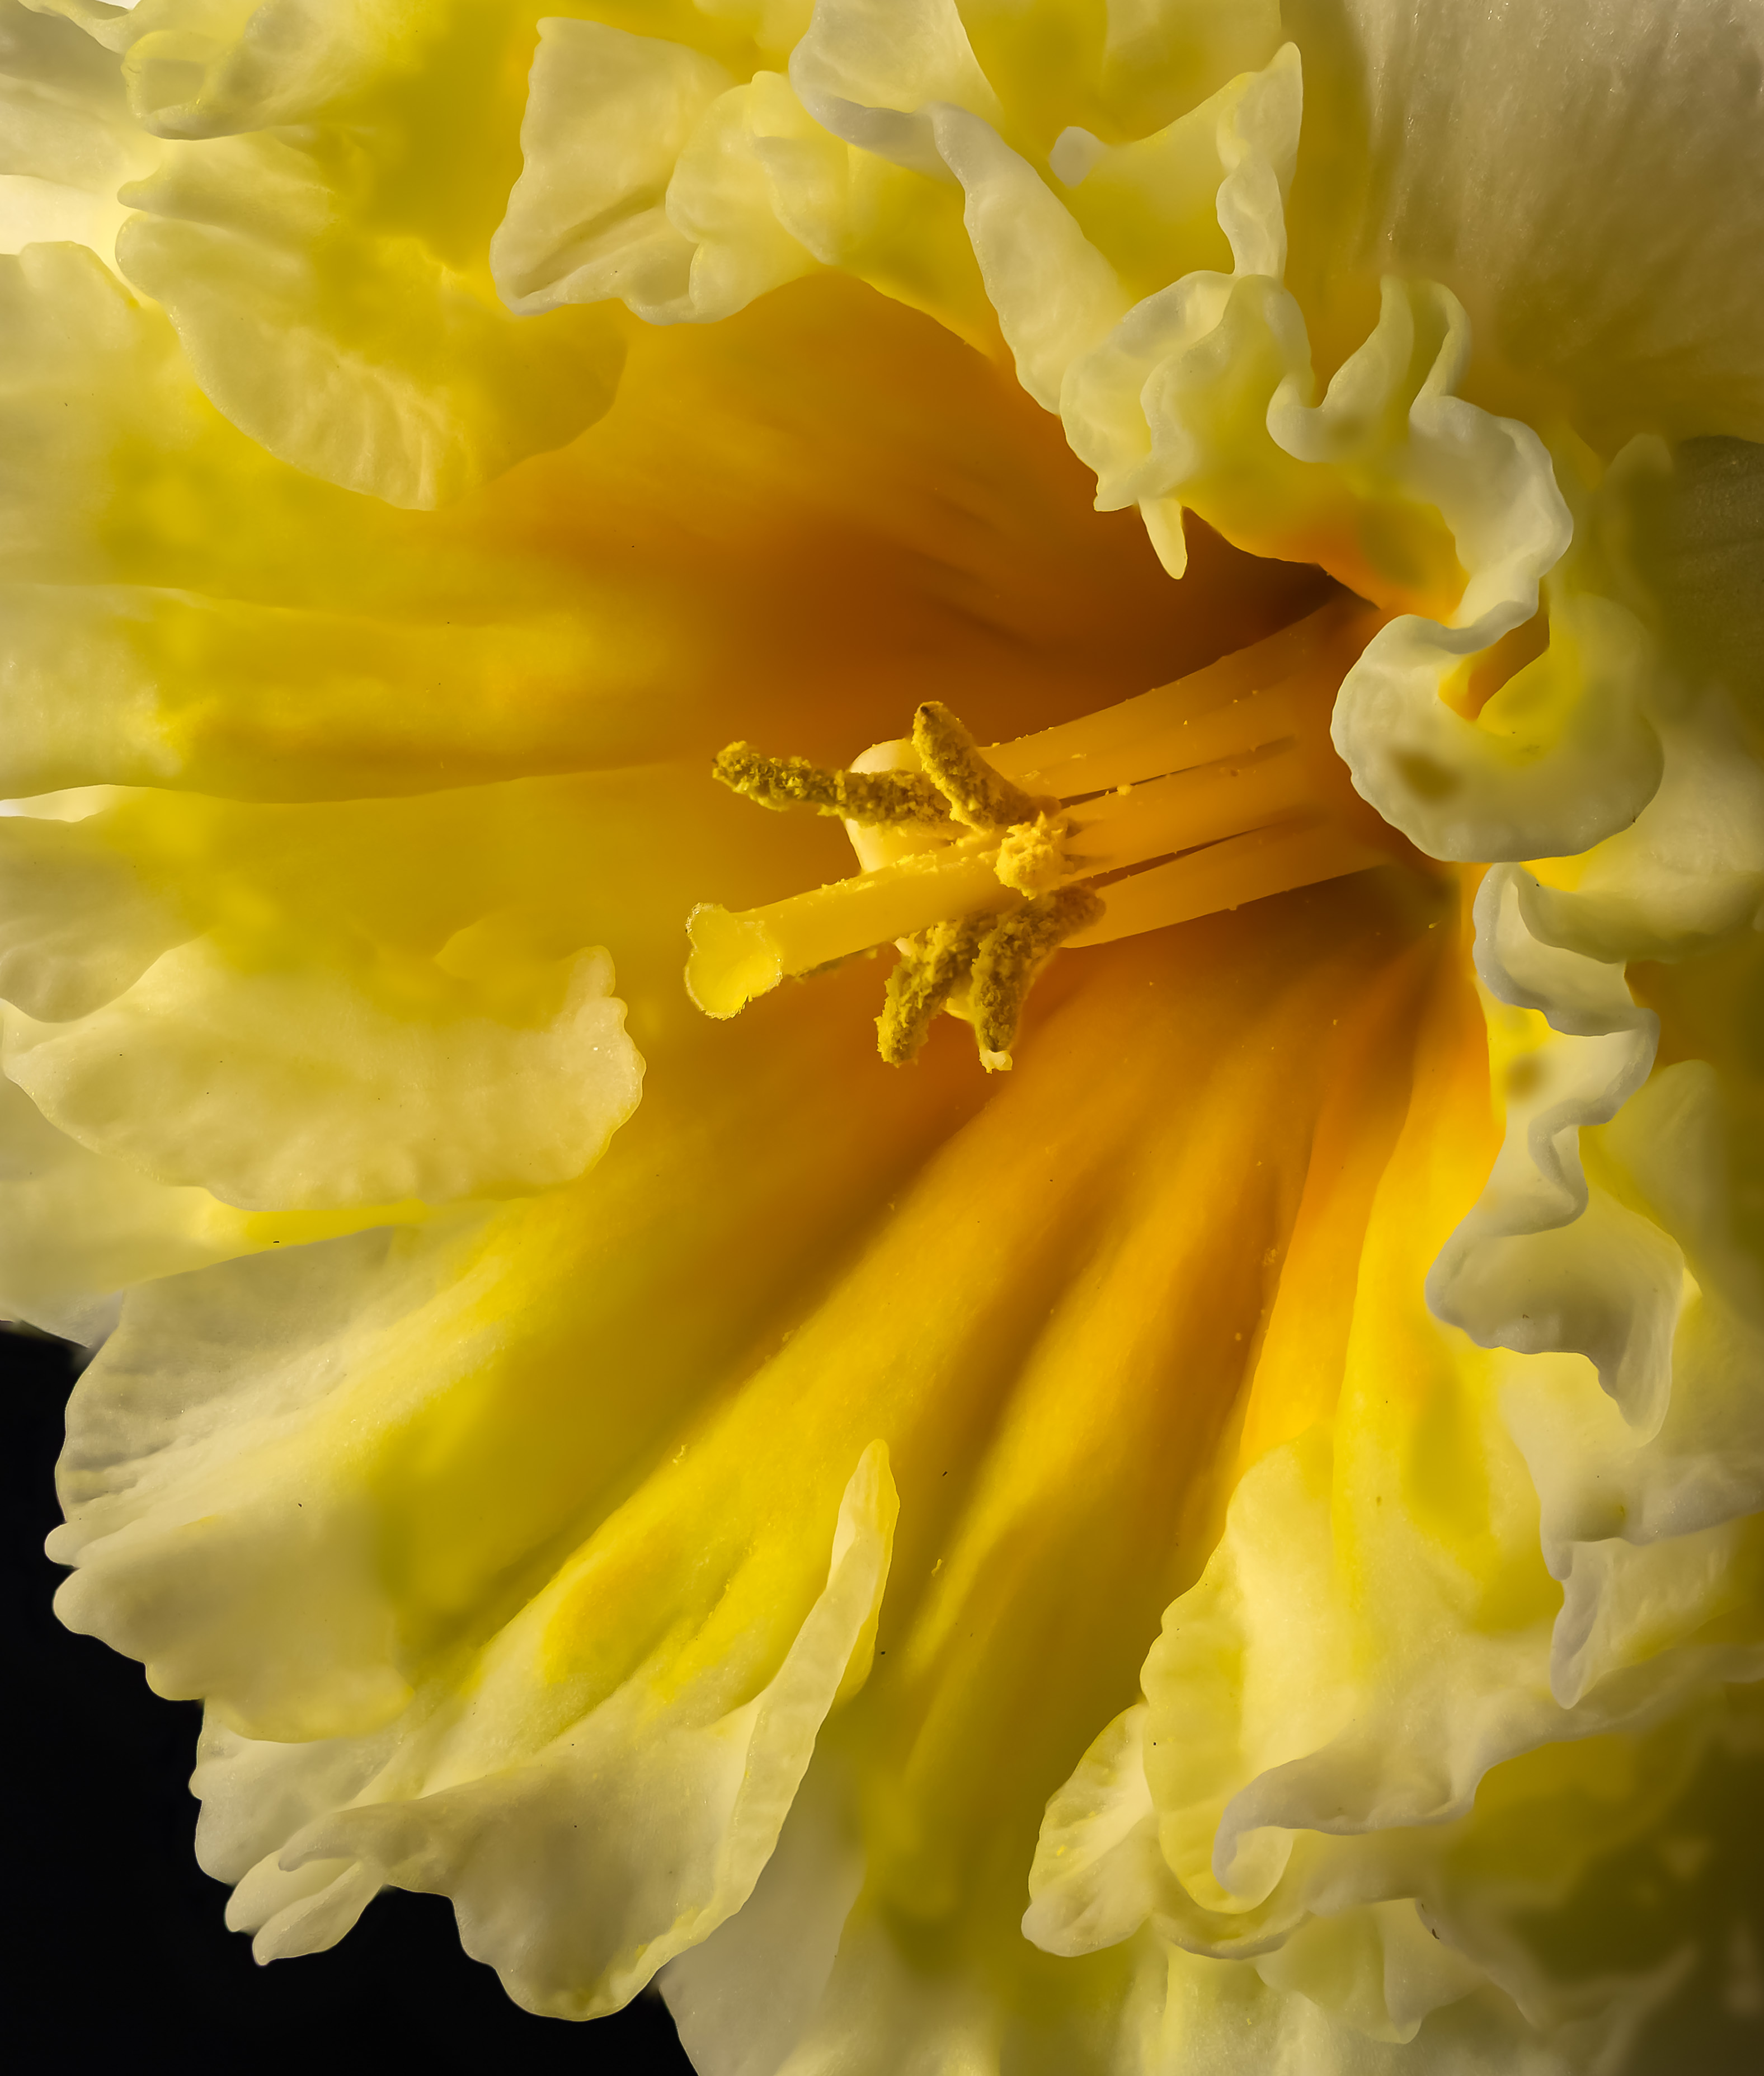 Daffodil Close-up by Doug Wolters